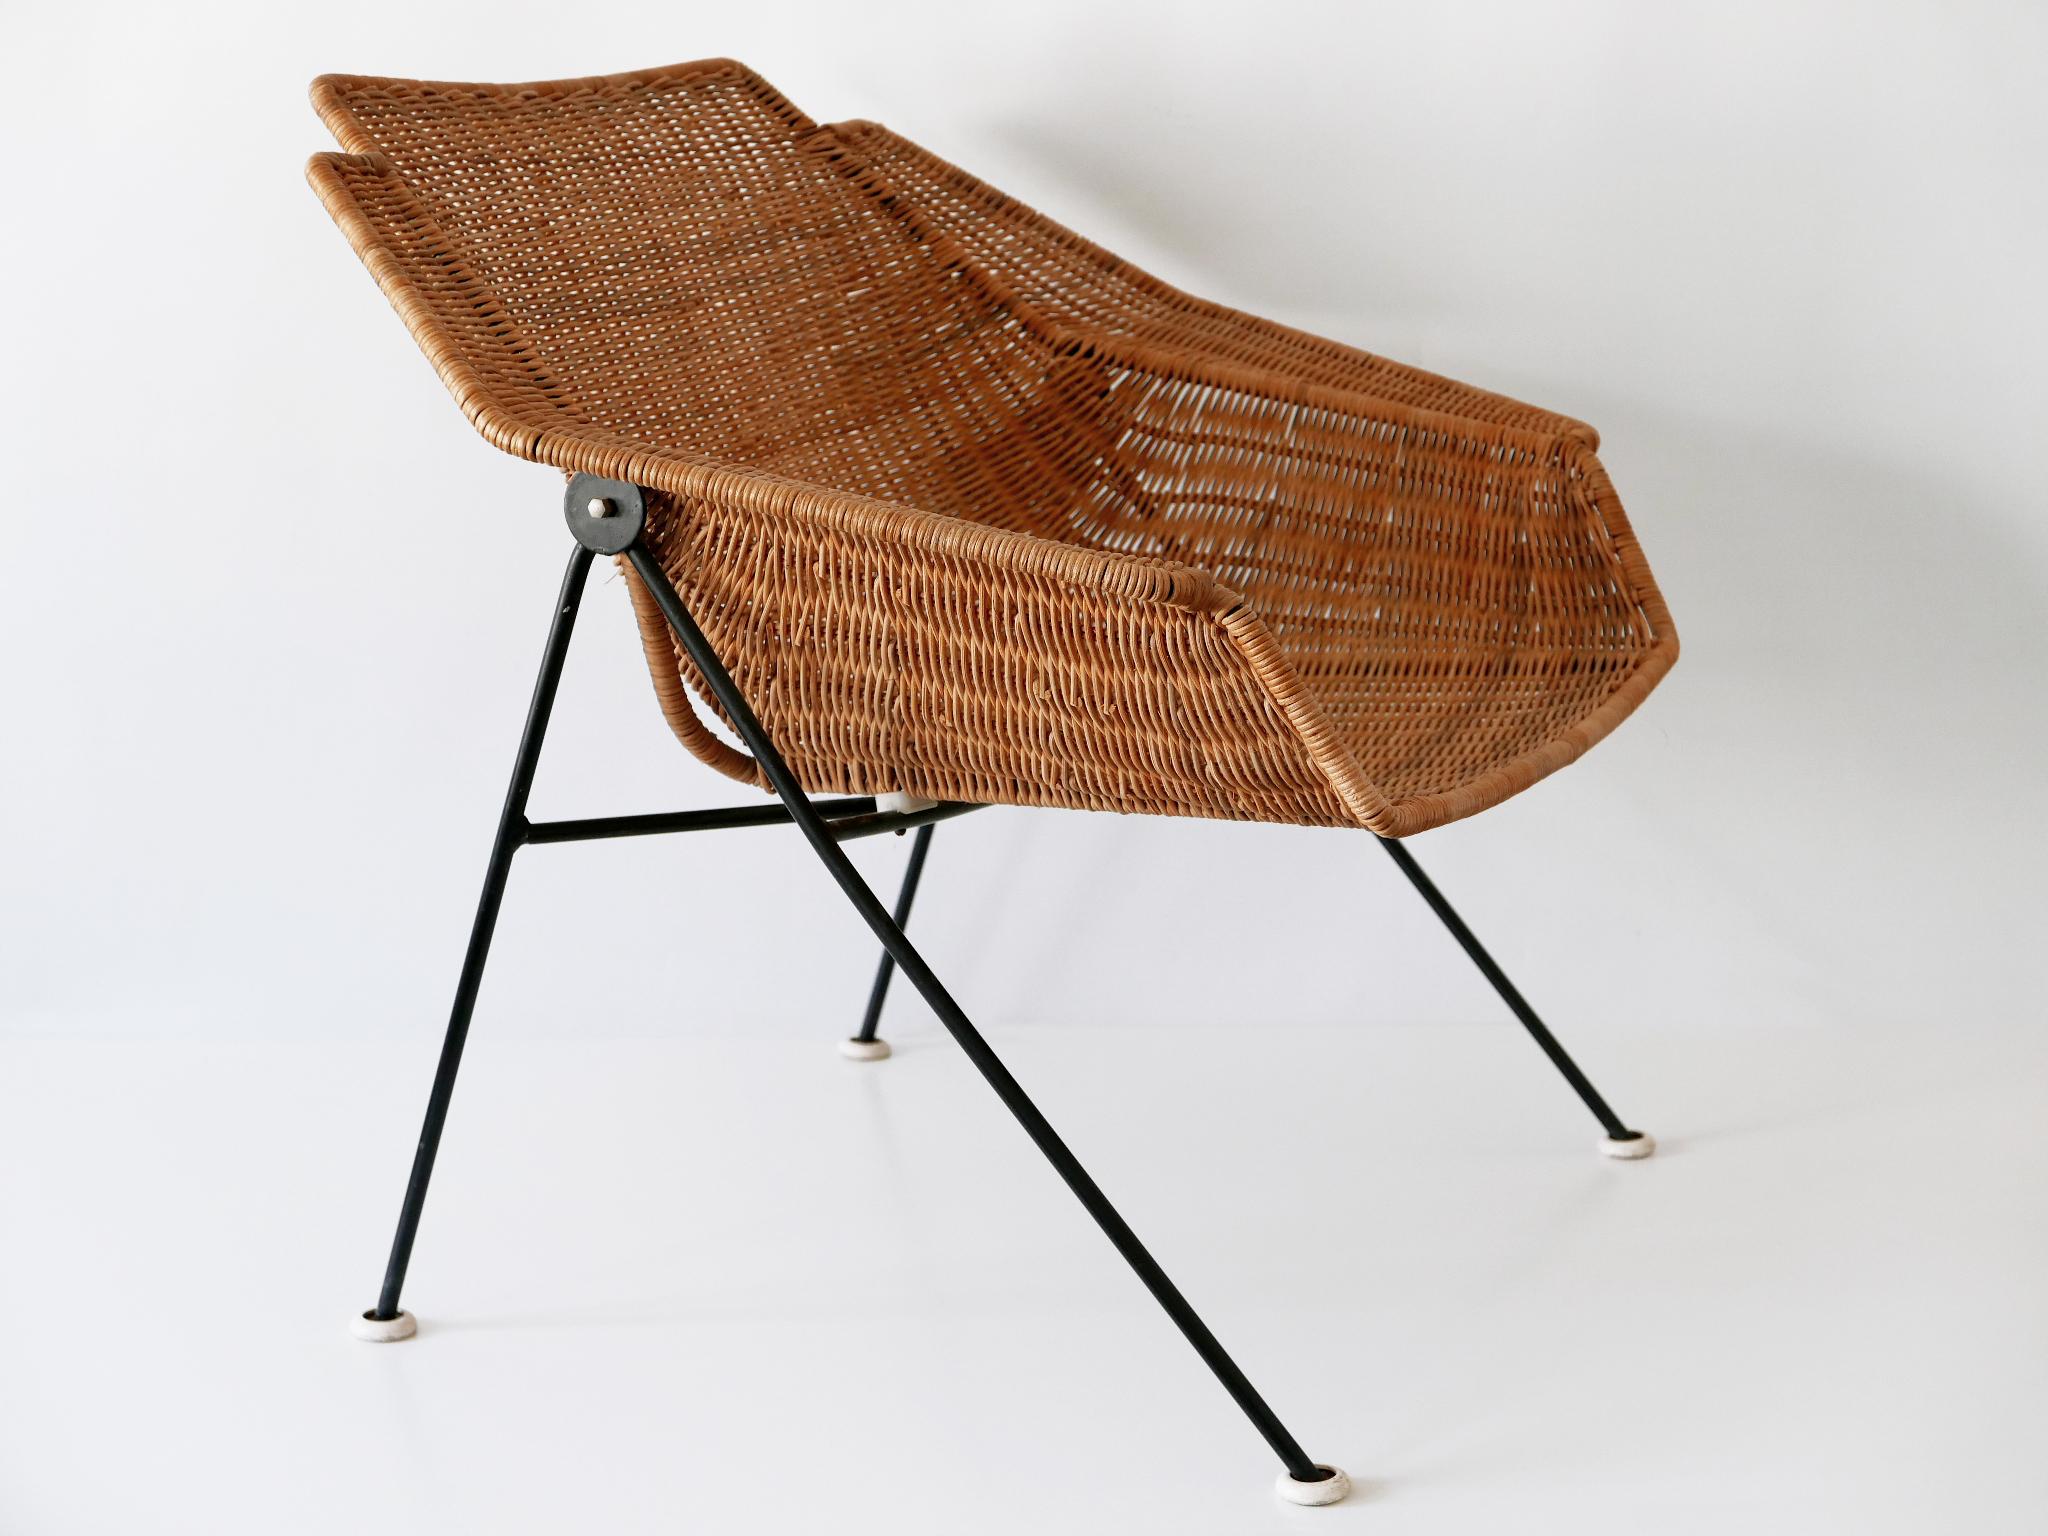 Exceptional Mid-Century Modern Wicker Lounge Chair or Armchair 1950s Sweden For Sale 5